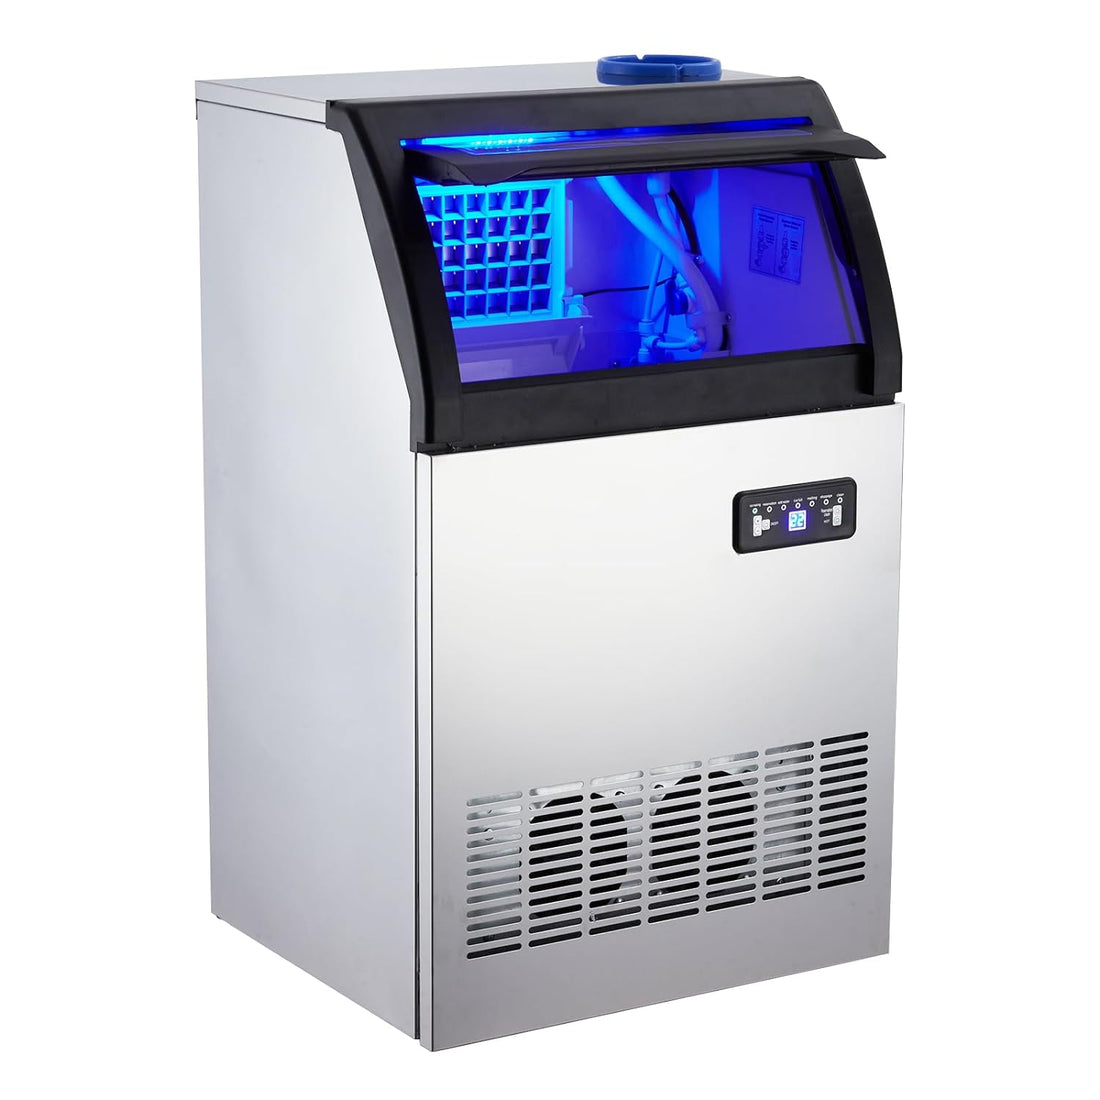 Commercial Ice Maker, 155 Lbs/24H Stainless Steel Undercounter Ice Maker, LED Digital Display Freestanding Ice Machine, 33 Lbs Storage Capacity for Bars/Cafes/Homes/Businesses